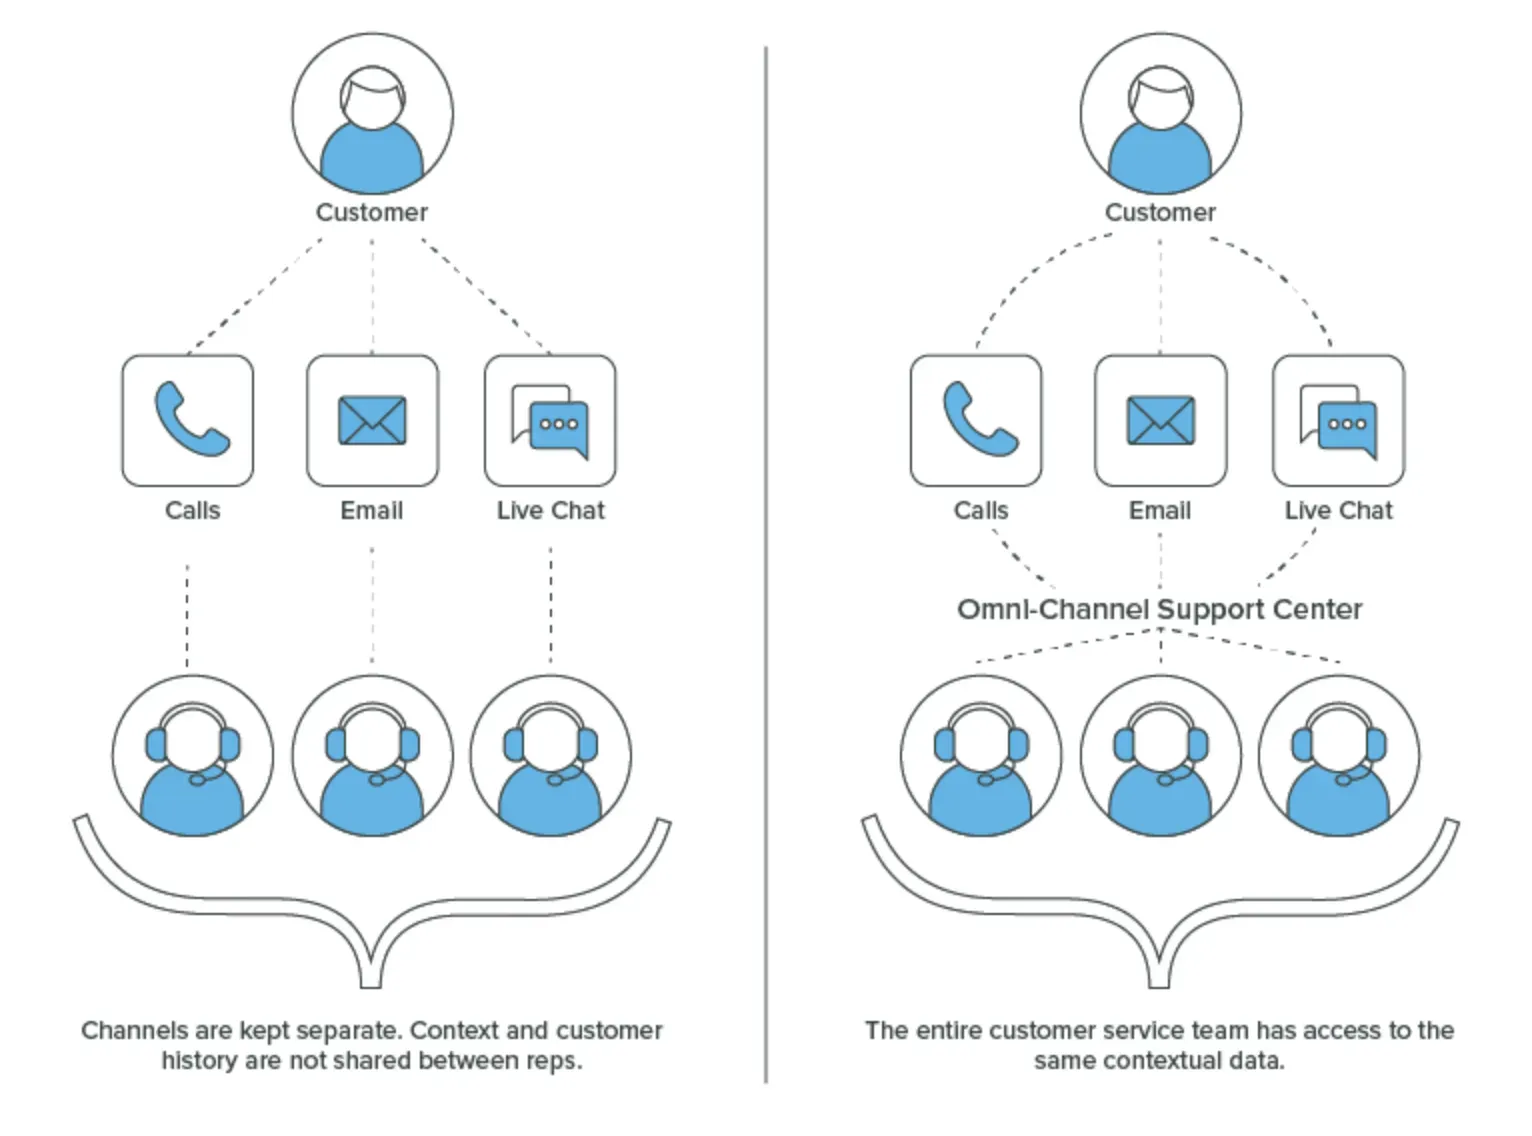 difference between Multi-Channel Support & Omnichannel Support?